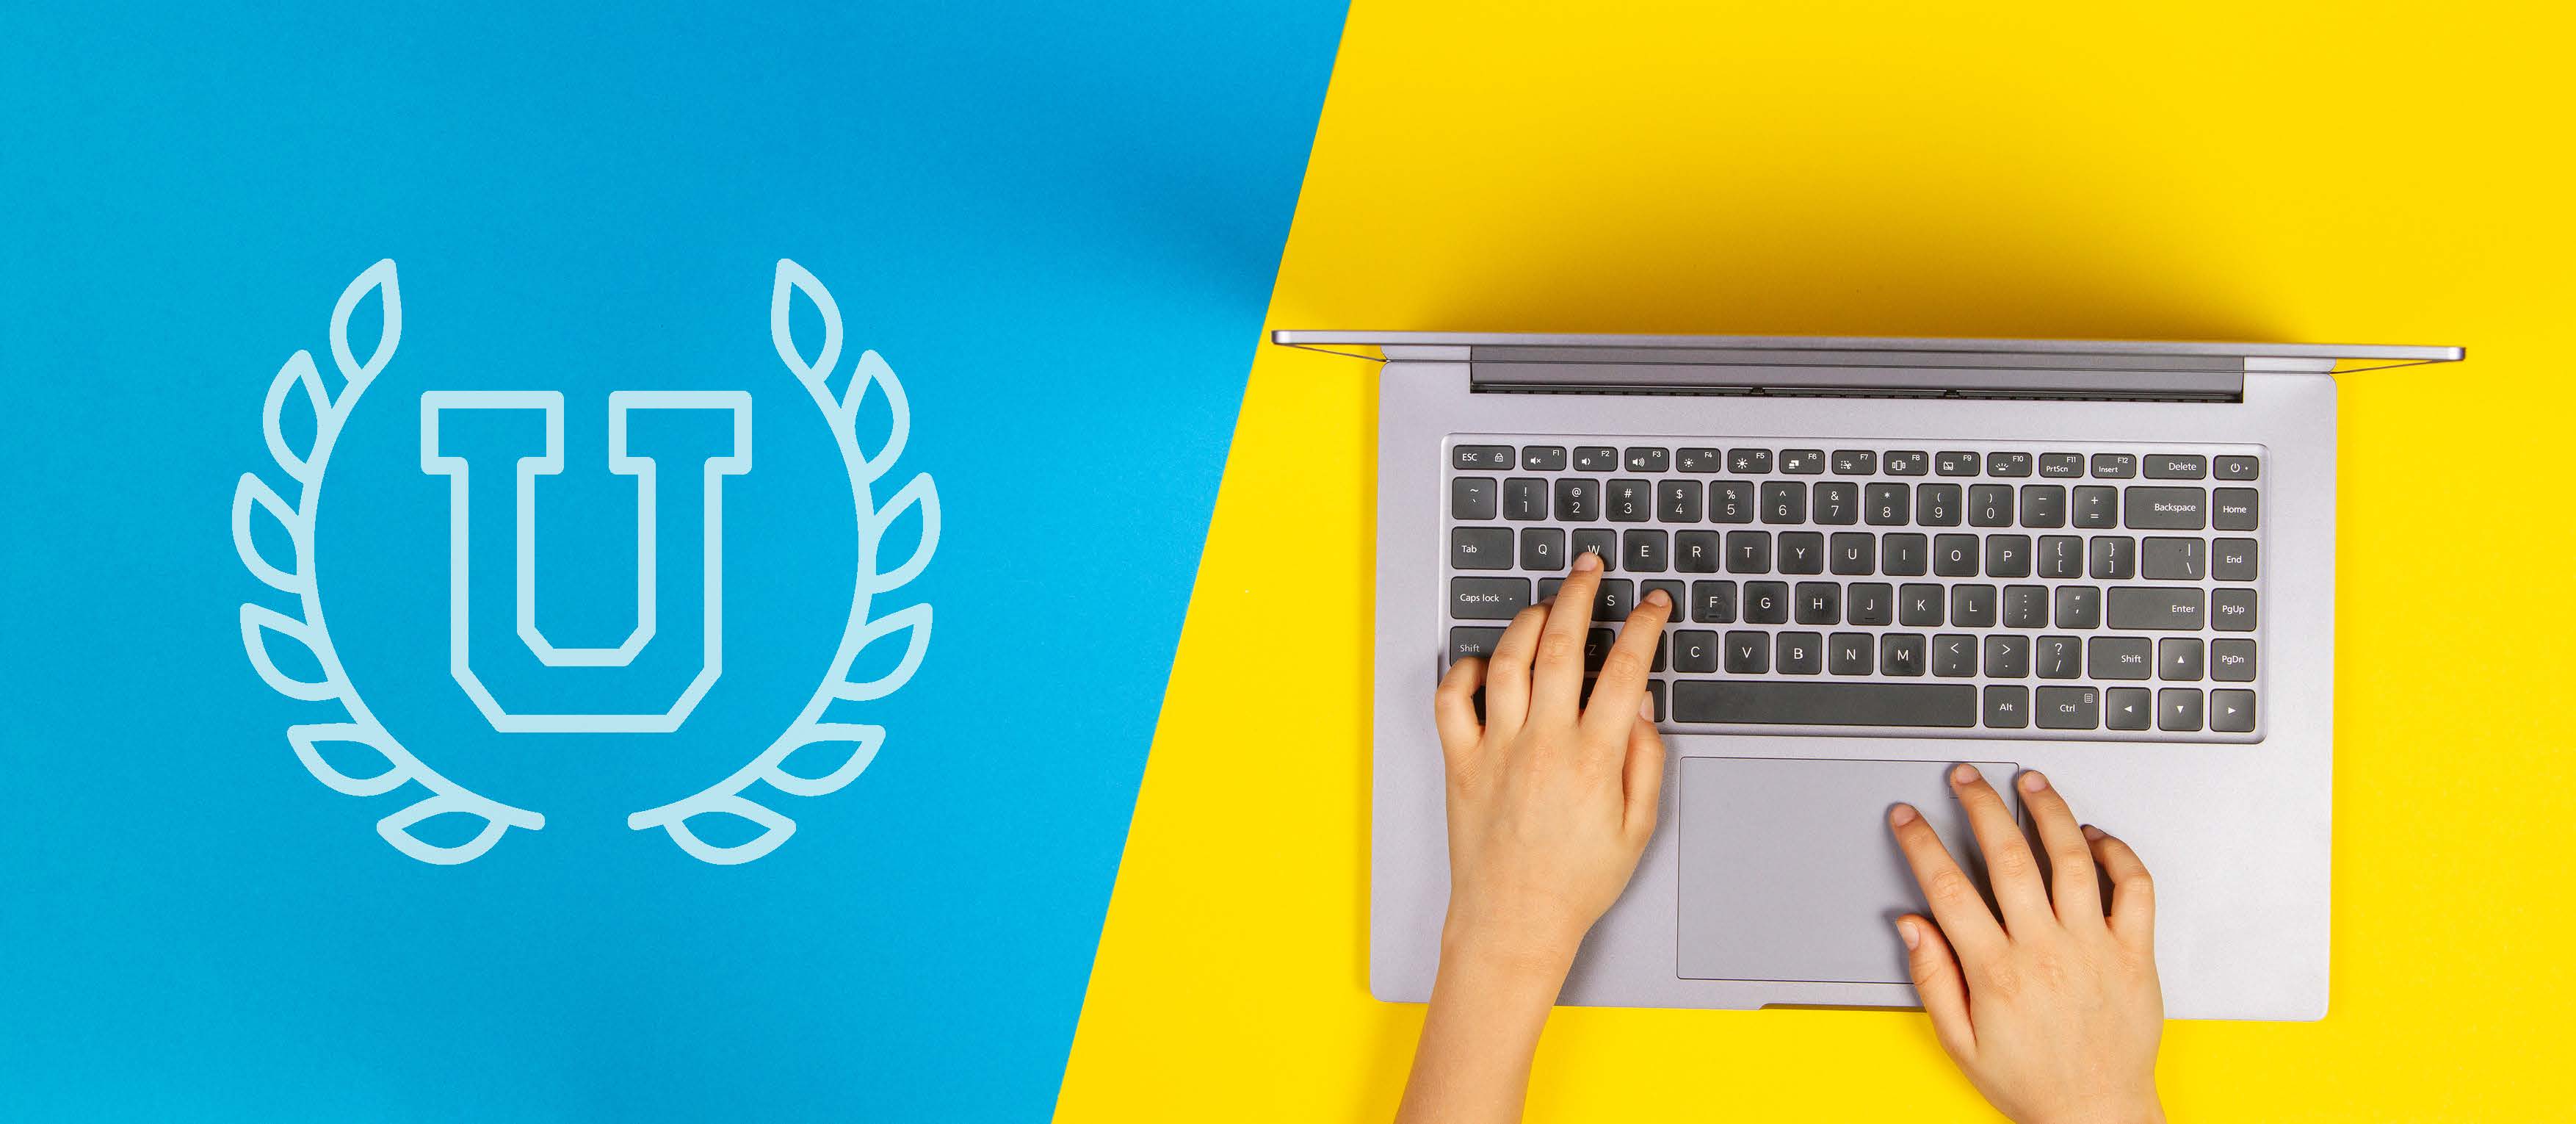 Generic University logo and laptop, hands typing on split blue, yellow backdrop